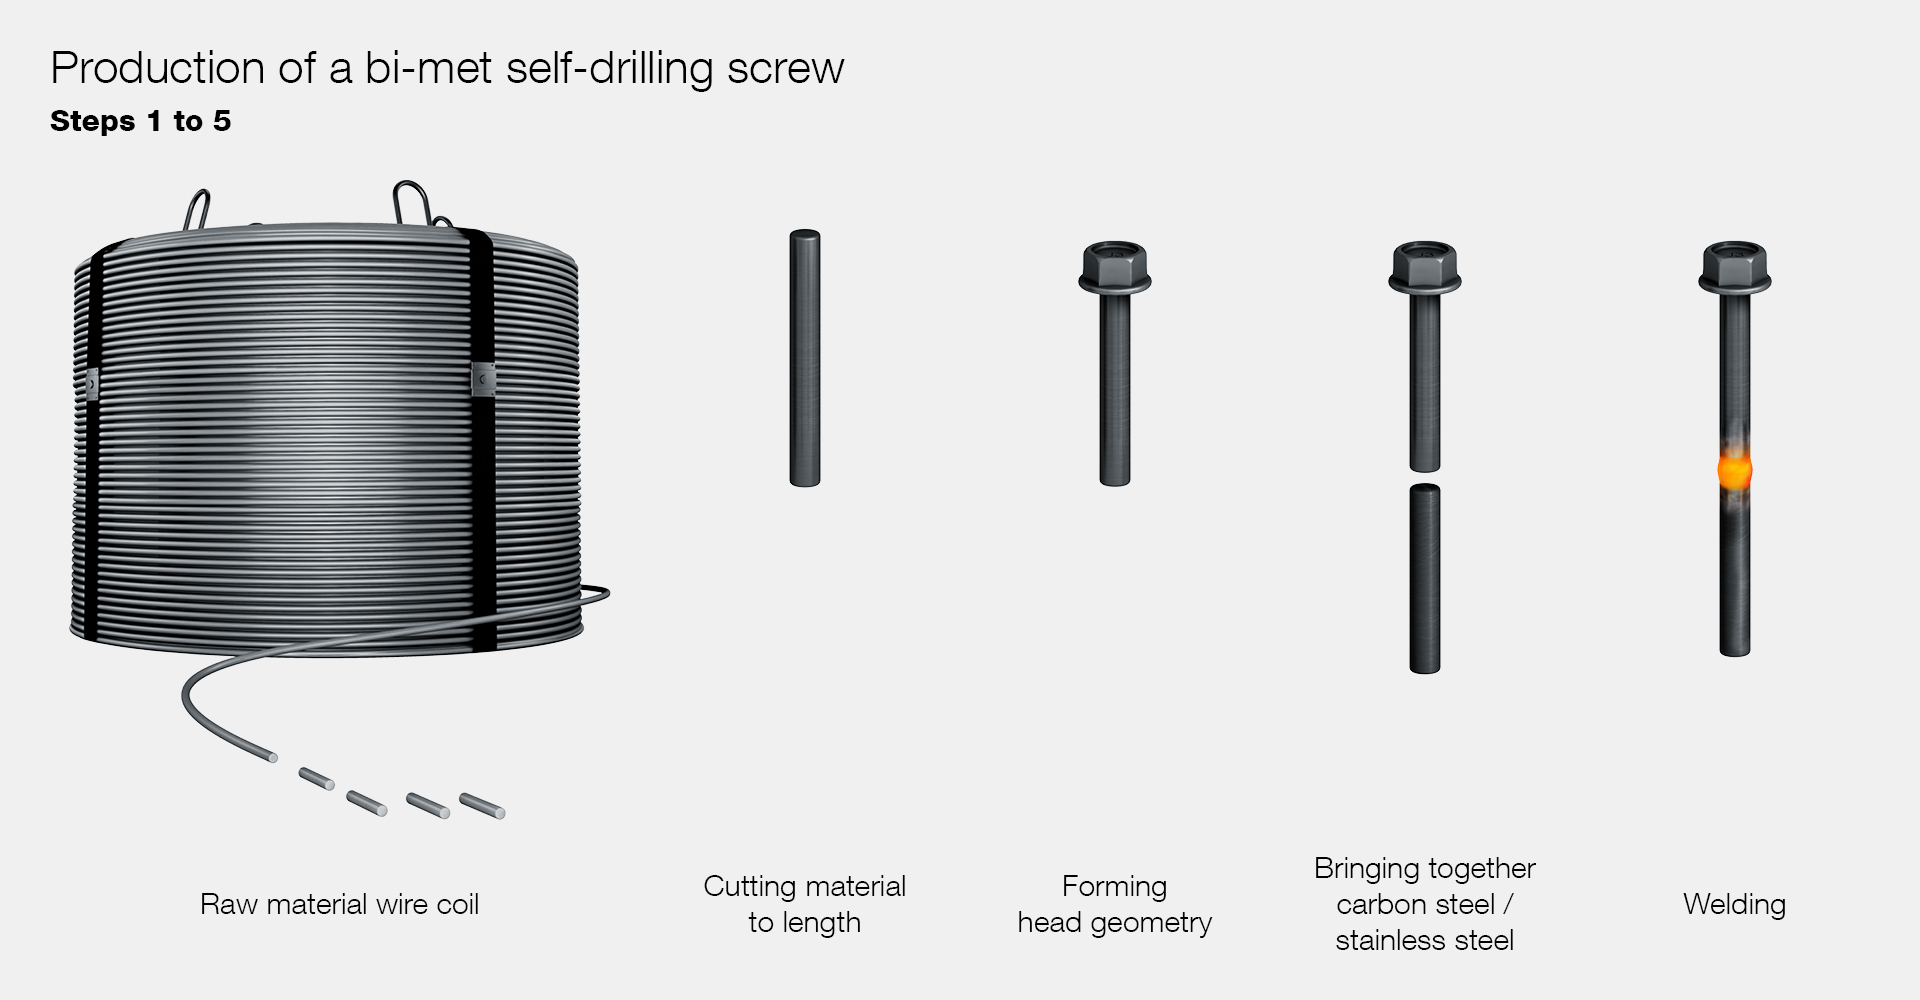 Production of a bi-met self-drilling screw (steps 1 to 5)